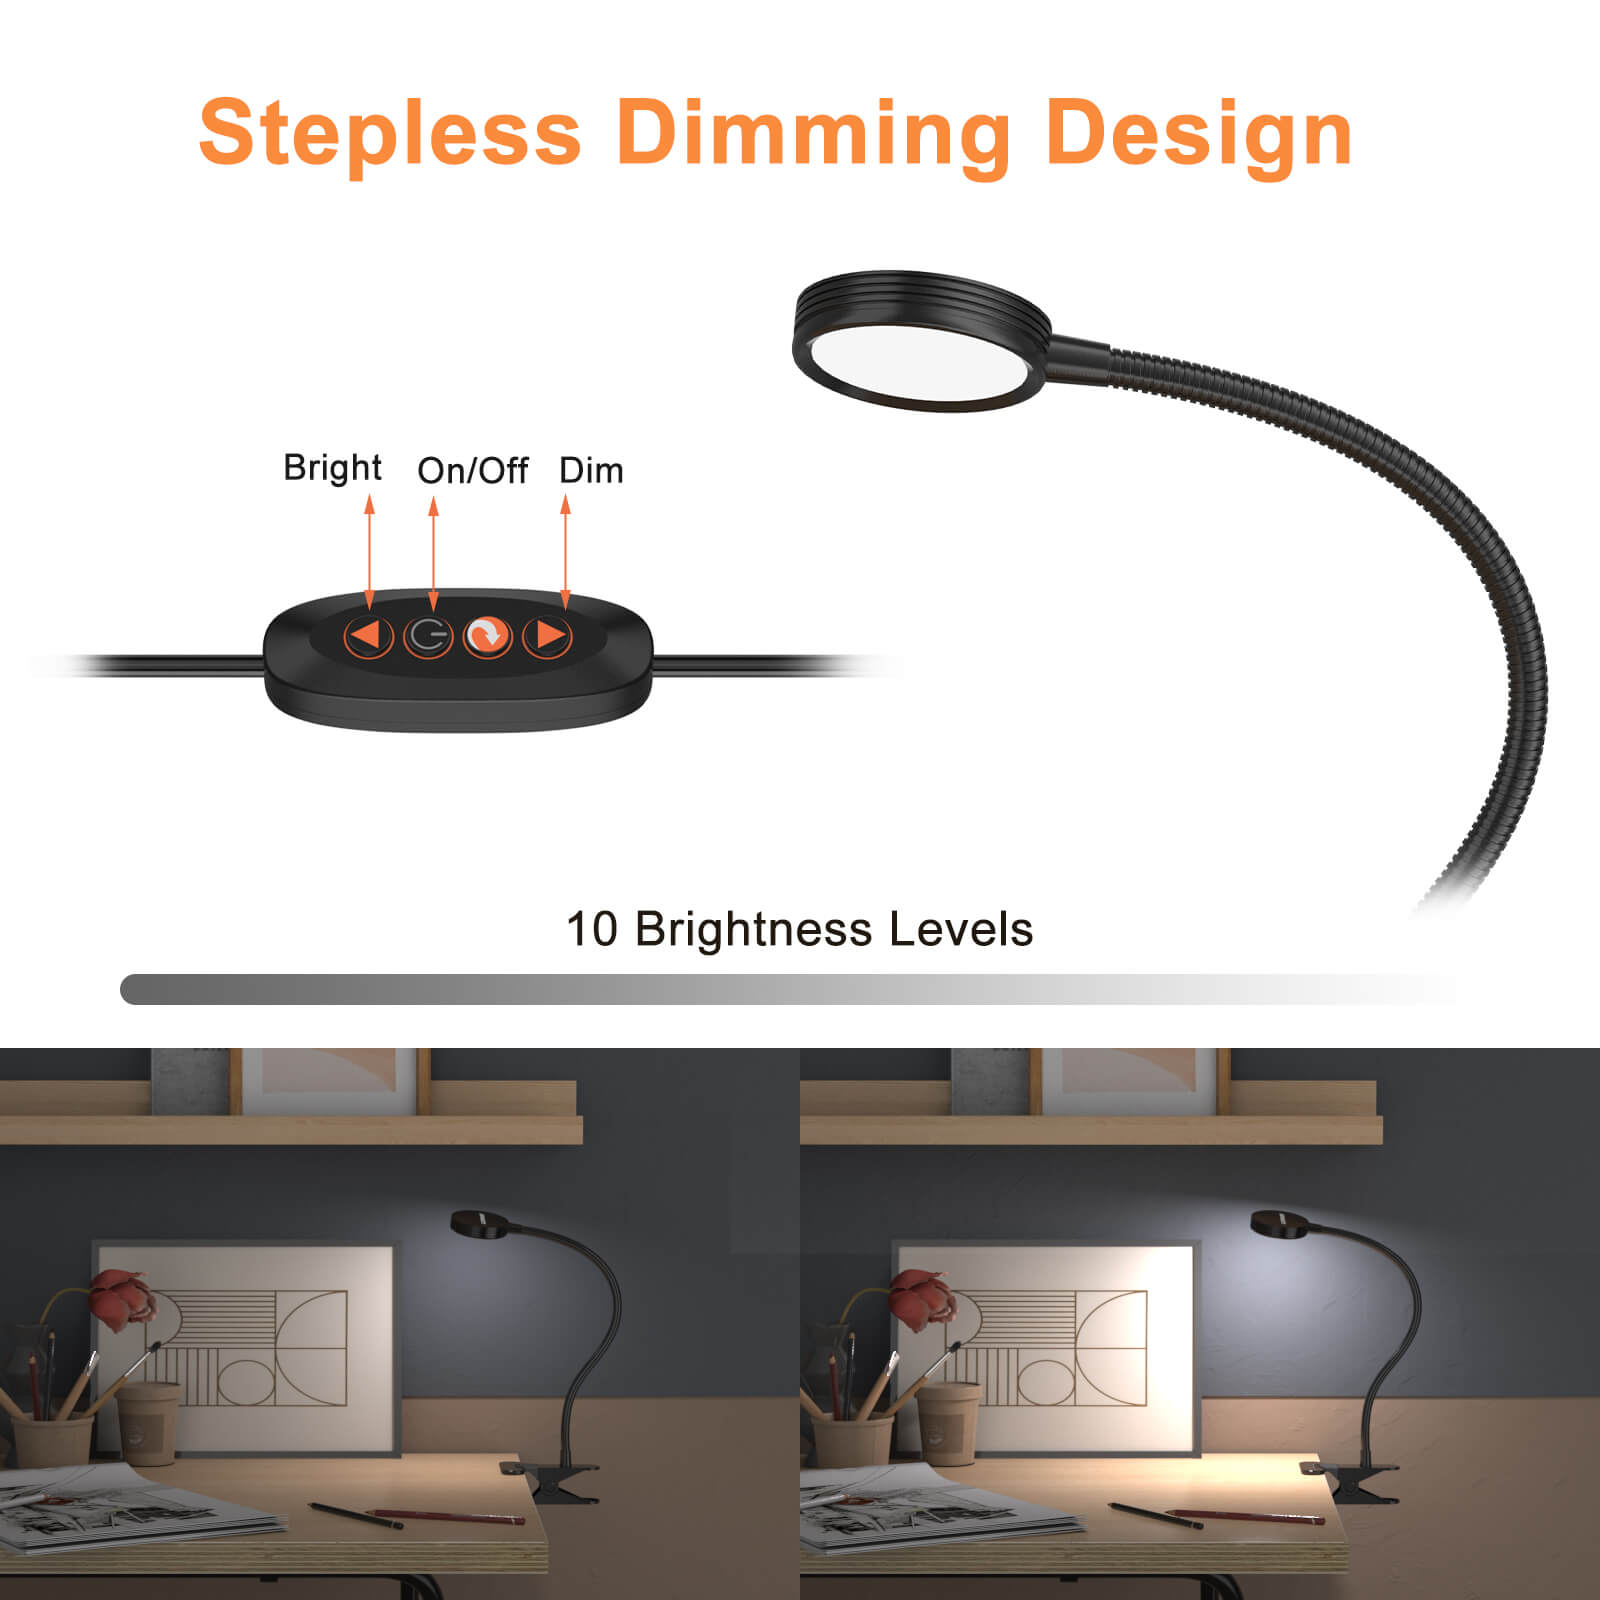 LED Clip on Light Dimmable with 10 Brightness Levels and 3 Colors